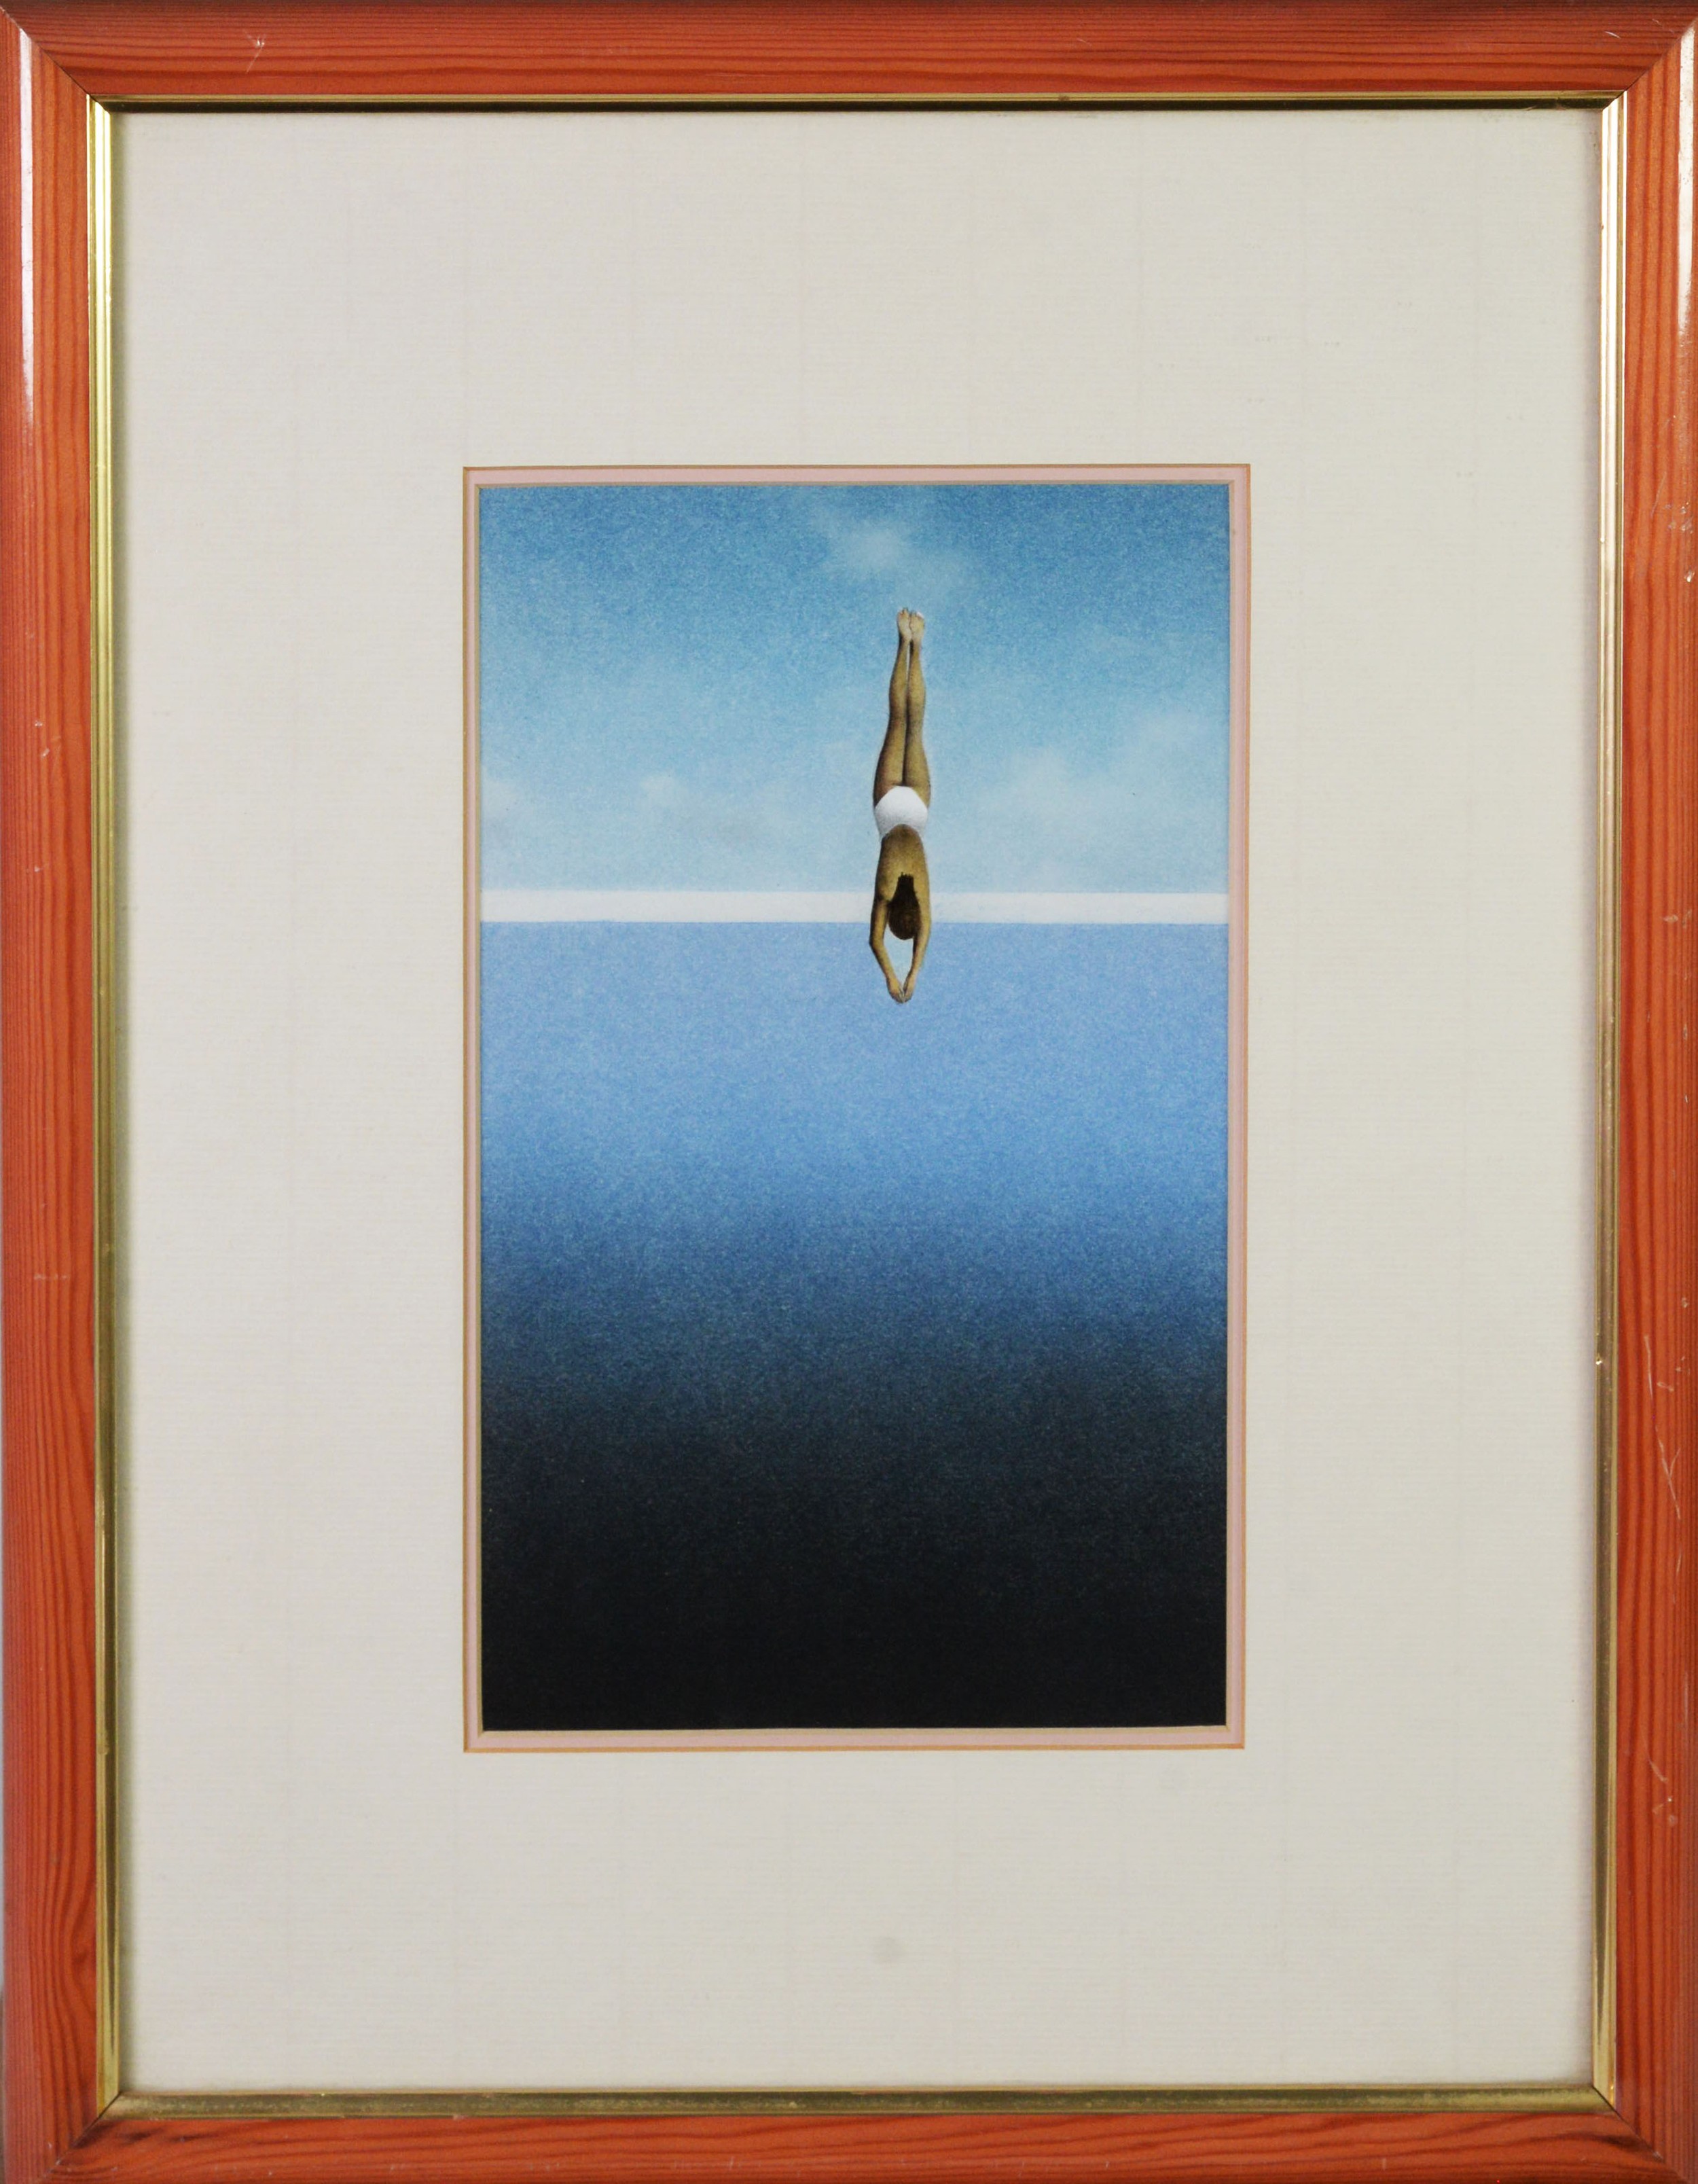 MARC GRIMSHAW PASTEL DRAWING A woman diving into the sea Signed lower left 9 3/4in x 5 3/4in (25 x - Image 2 of 2